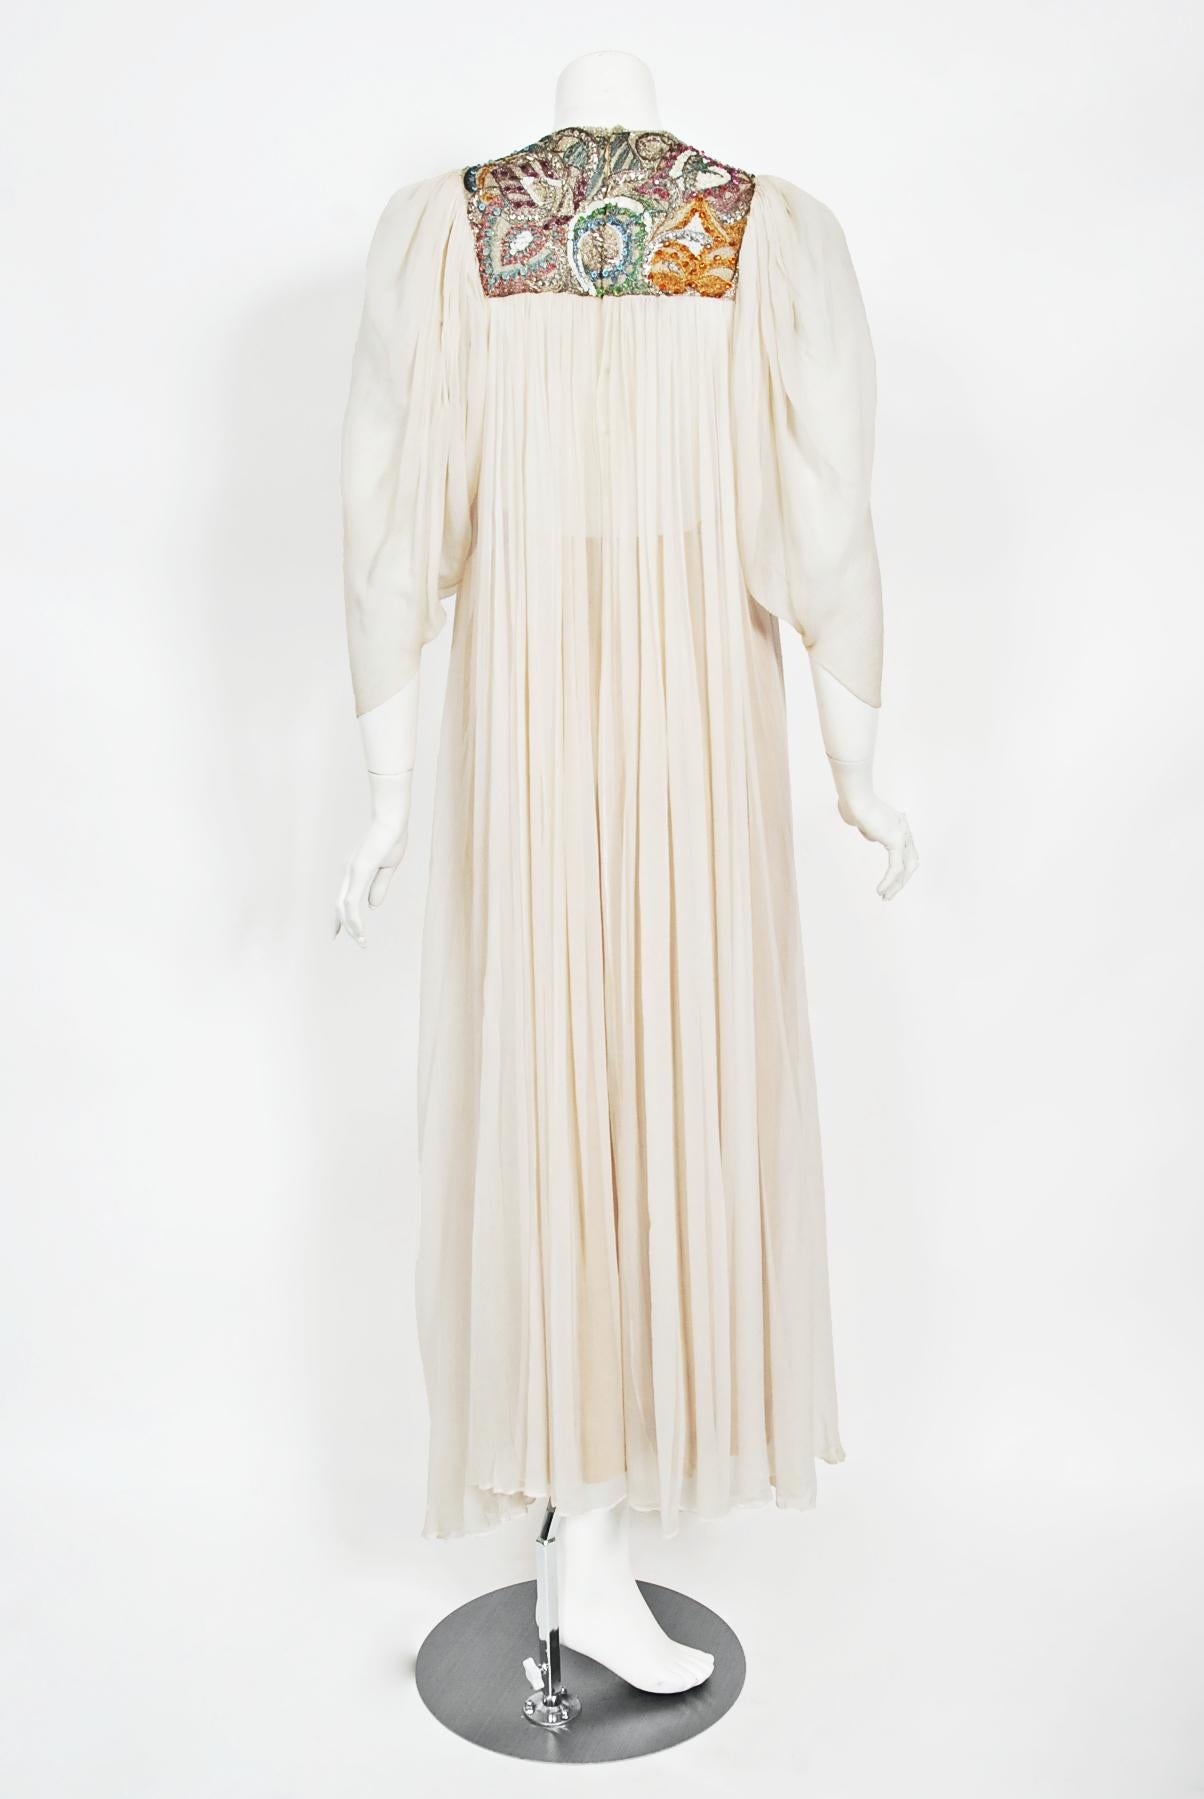 1970's Madame Grès Haute Couture Beaded Embroidered Ivory Sheer Silk Bridal Gown For Sale 7